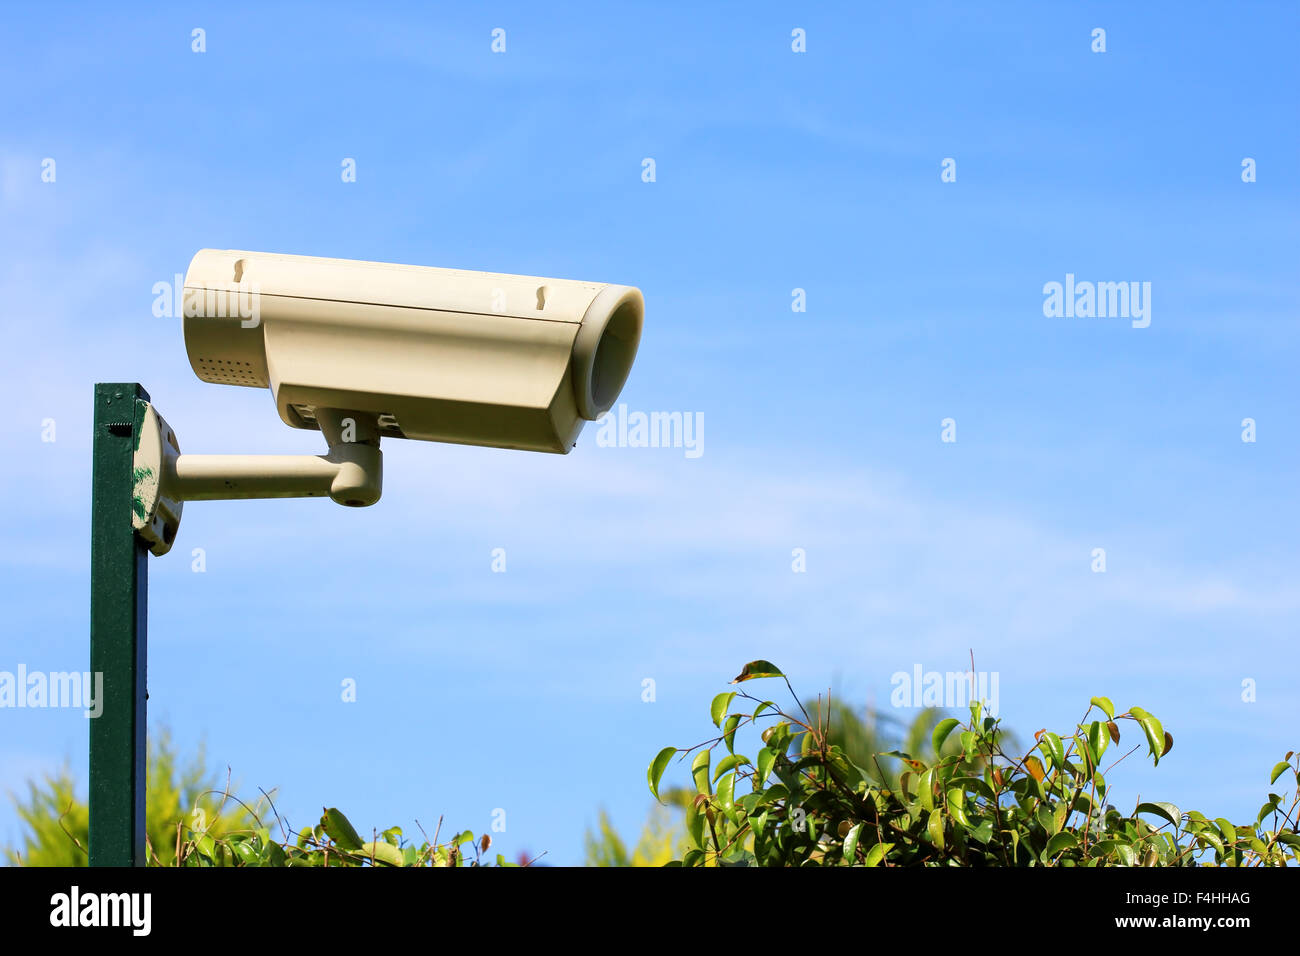 camera for implementation of video monitoring in the garden Stock Photo